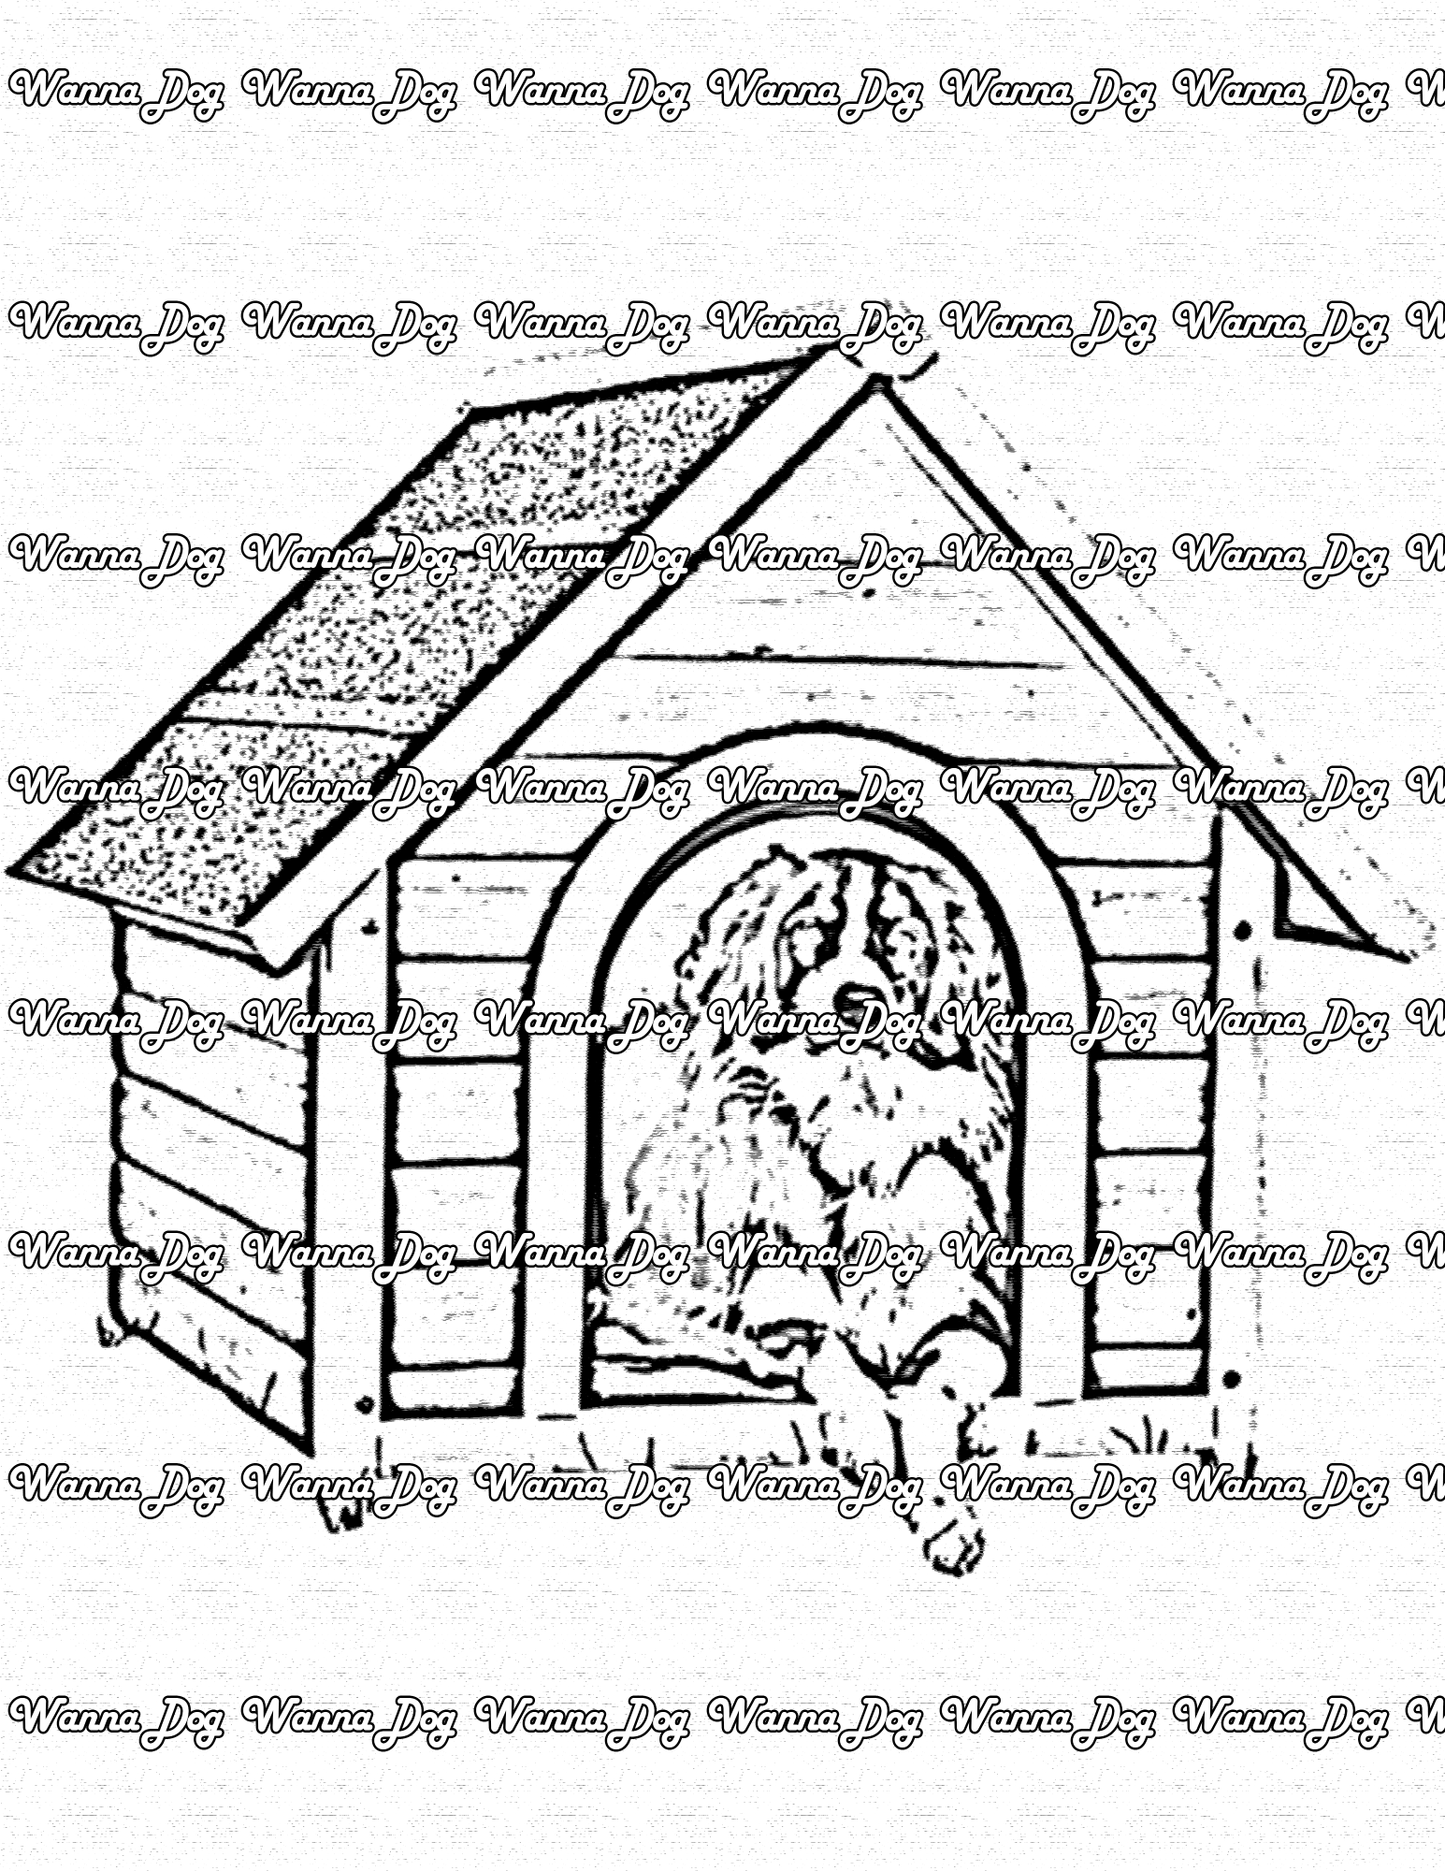 Border Collie Coloring Page of a Border Collie in a dog house